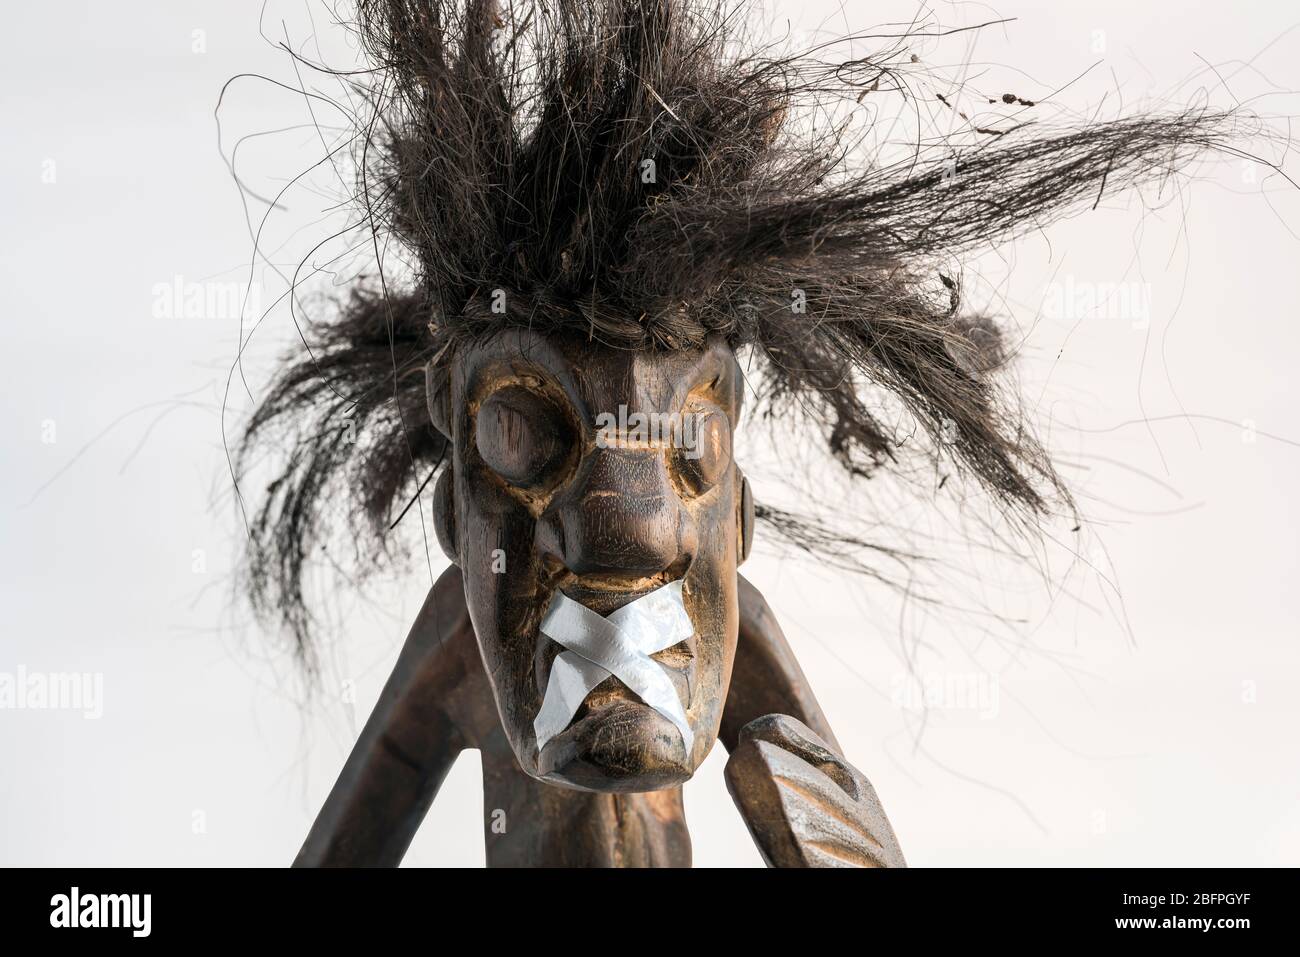 Wooden carved figure of primitive man wearing straw skirt & long black tousled hair, taped up mouth. Concept; Social immobility, silenced, ignored. Stock Photo